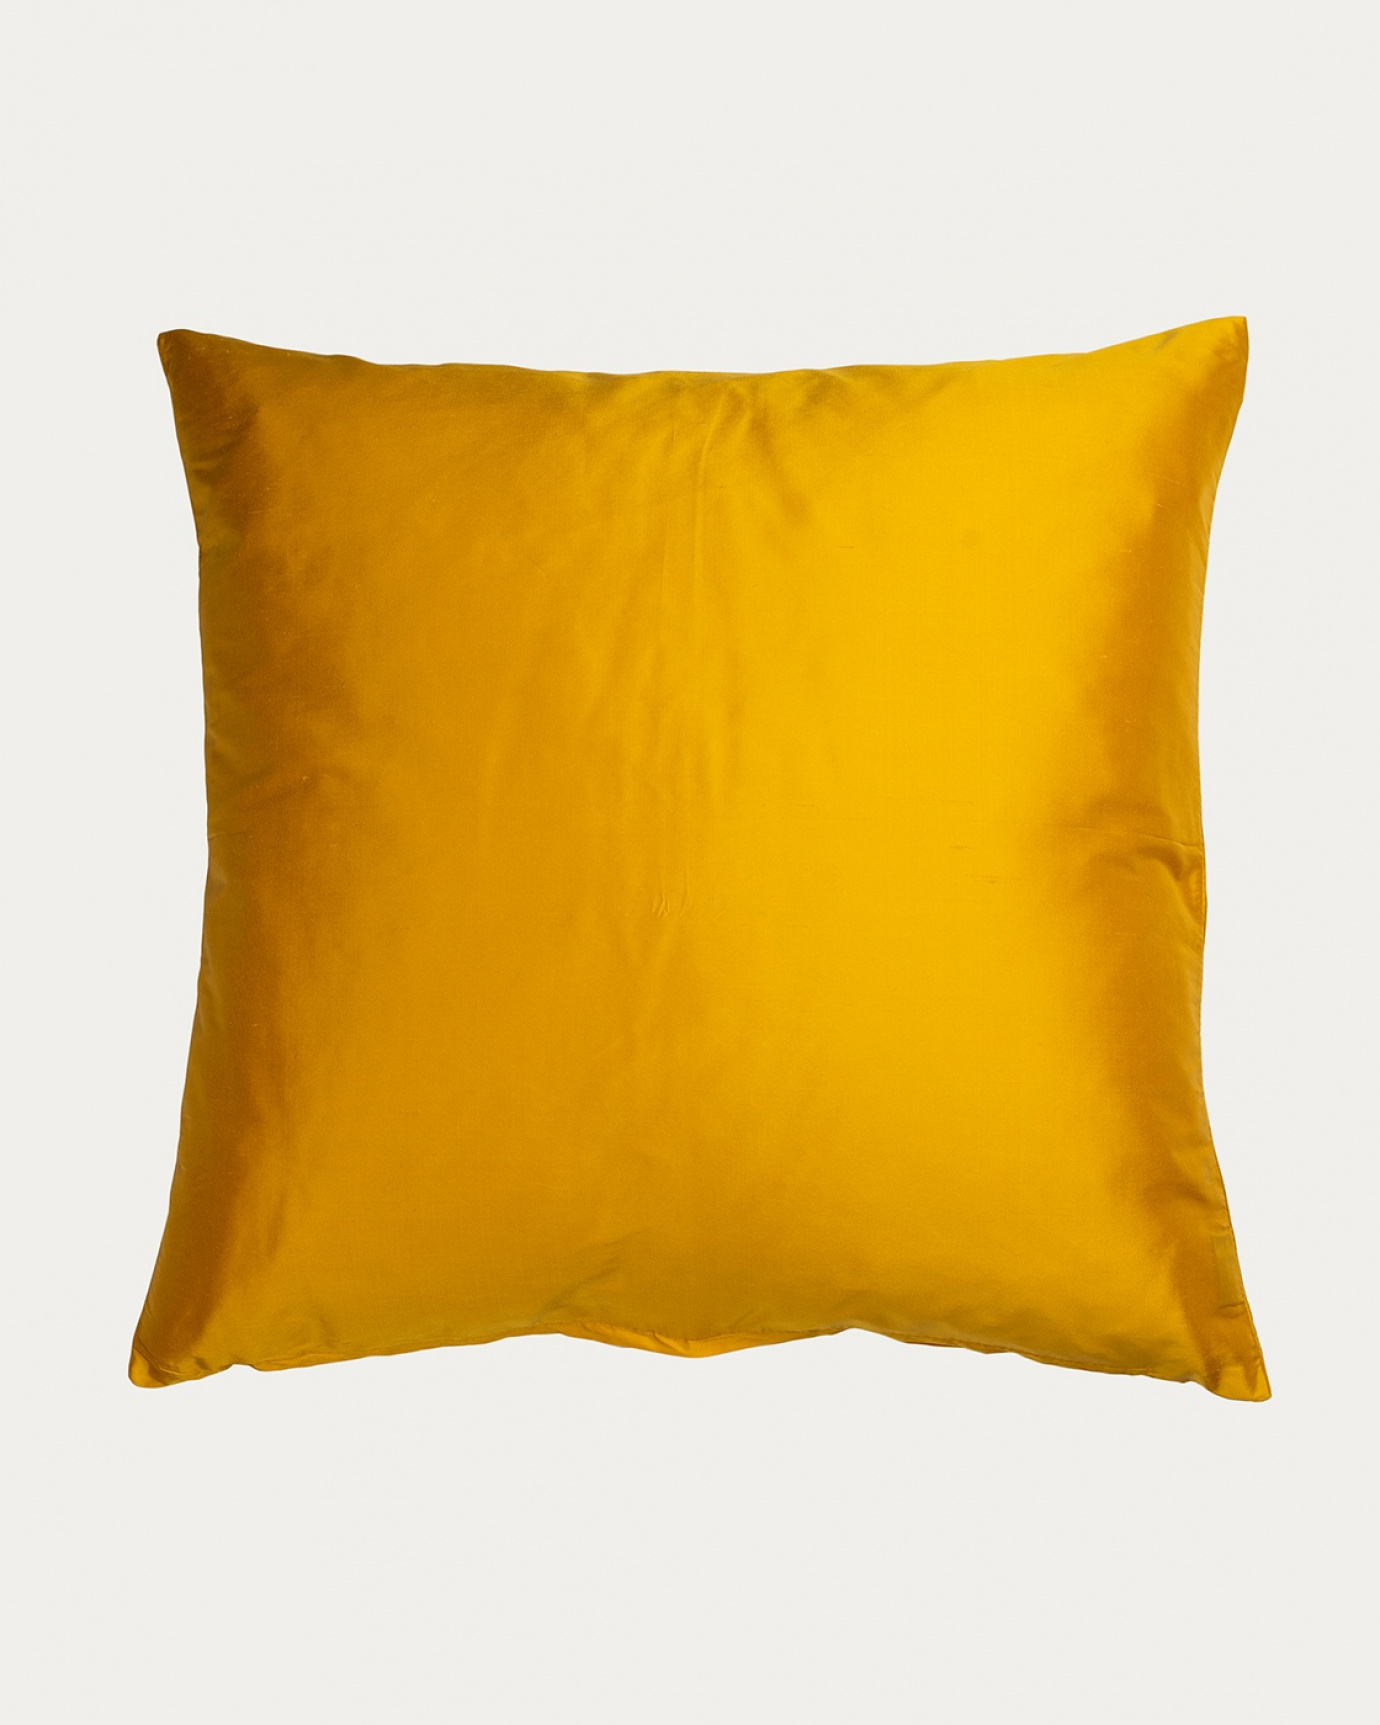 Product image tangerine yellow DUPION cushion cover made of 100% dupion silk from LINUM DESIGN. Size 50x50 cm.